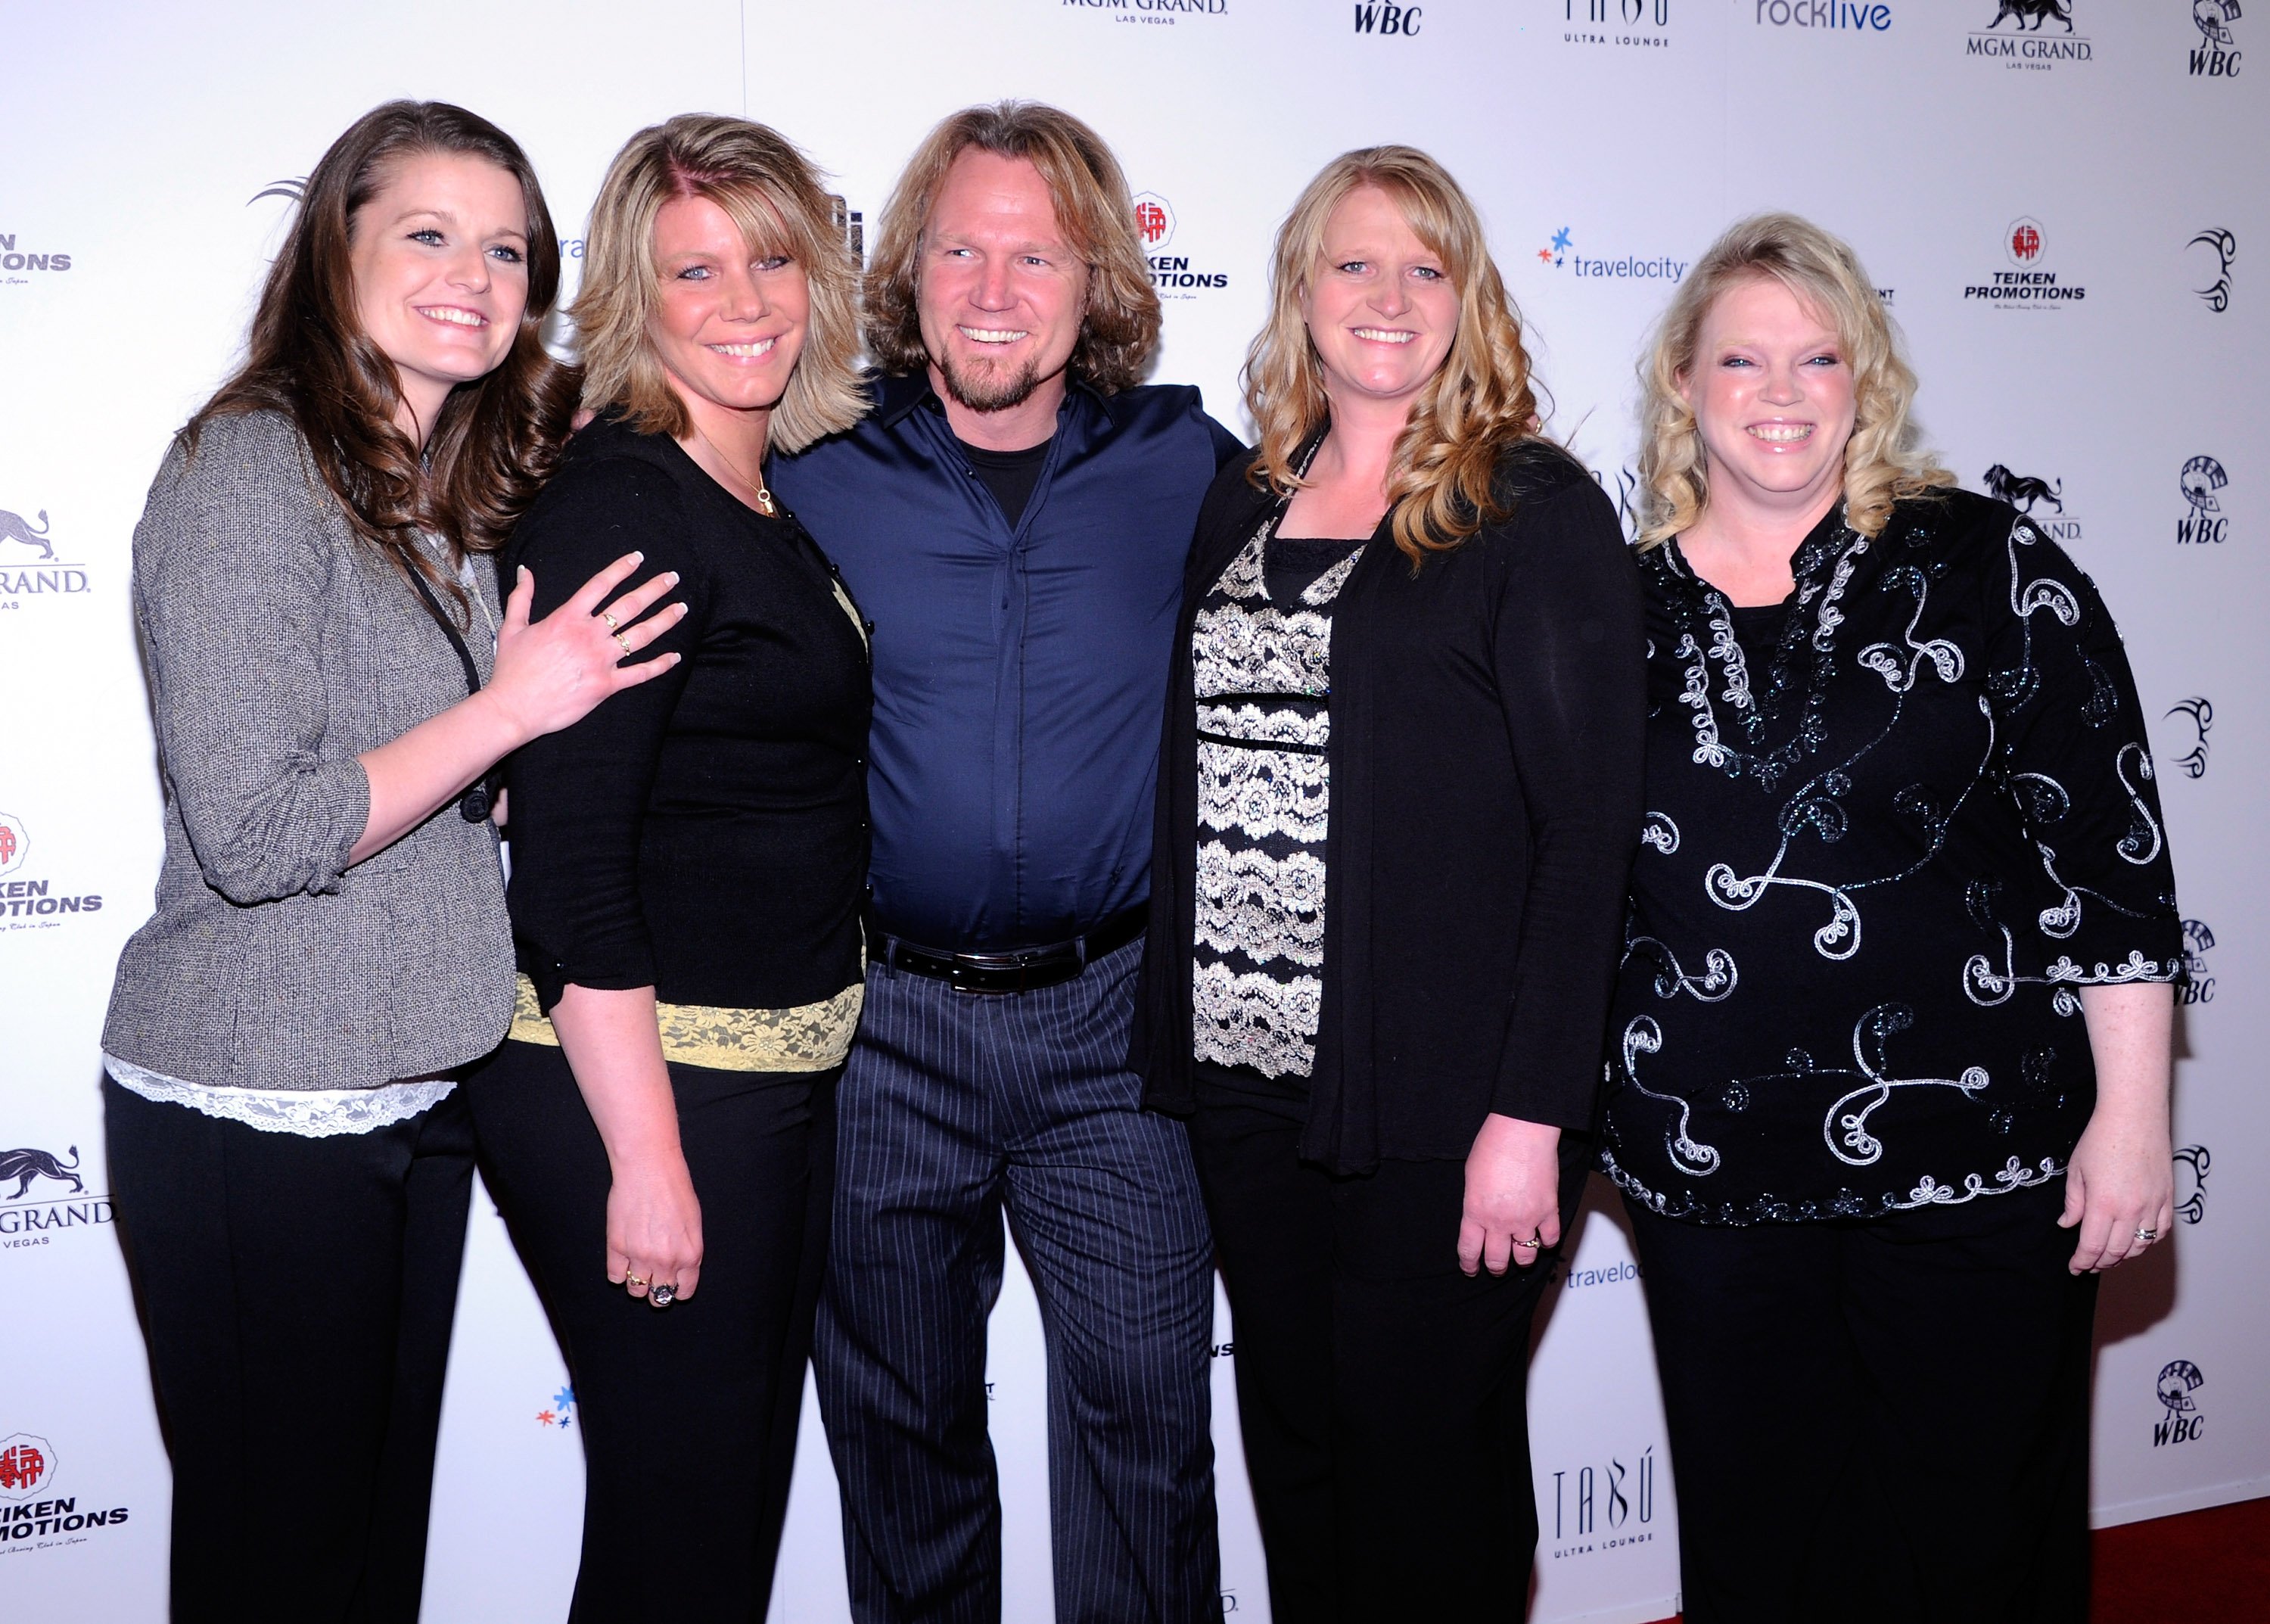 The Brown family on April 14, 2012 in Las Vegas, Nevada | Source: Getty Images